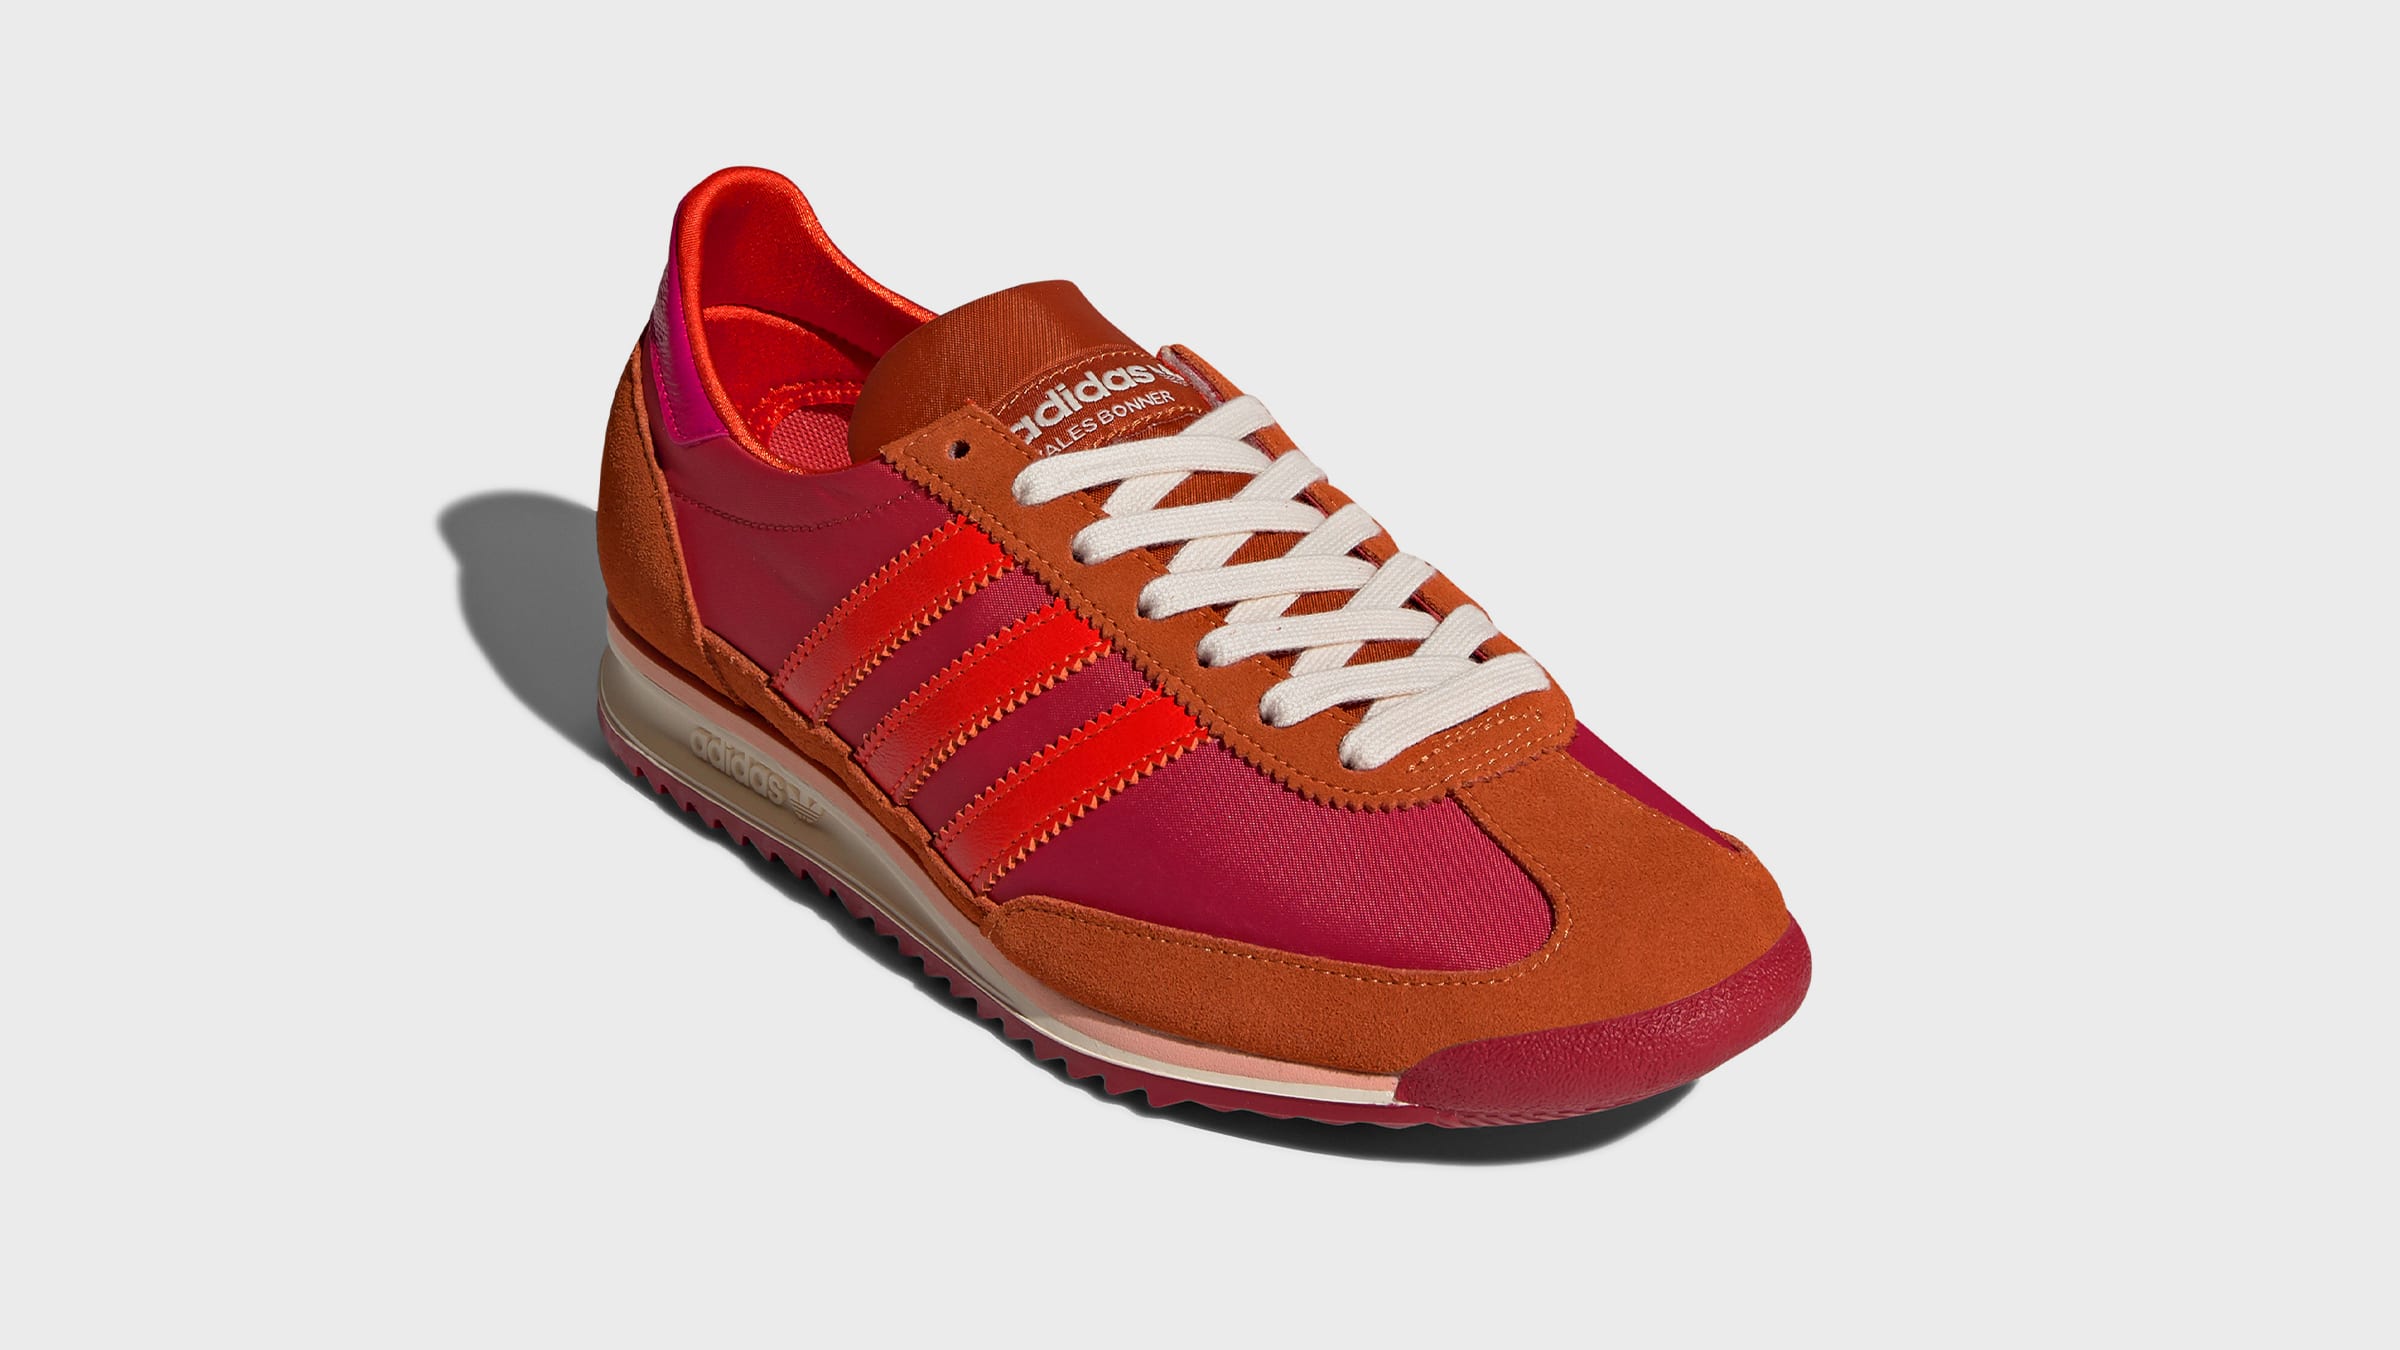 Adidas x Wales Bonner SL72 (Trace Pink, Orange & Maroon) | END. Launches